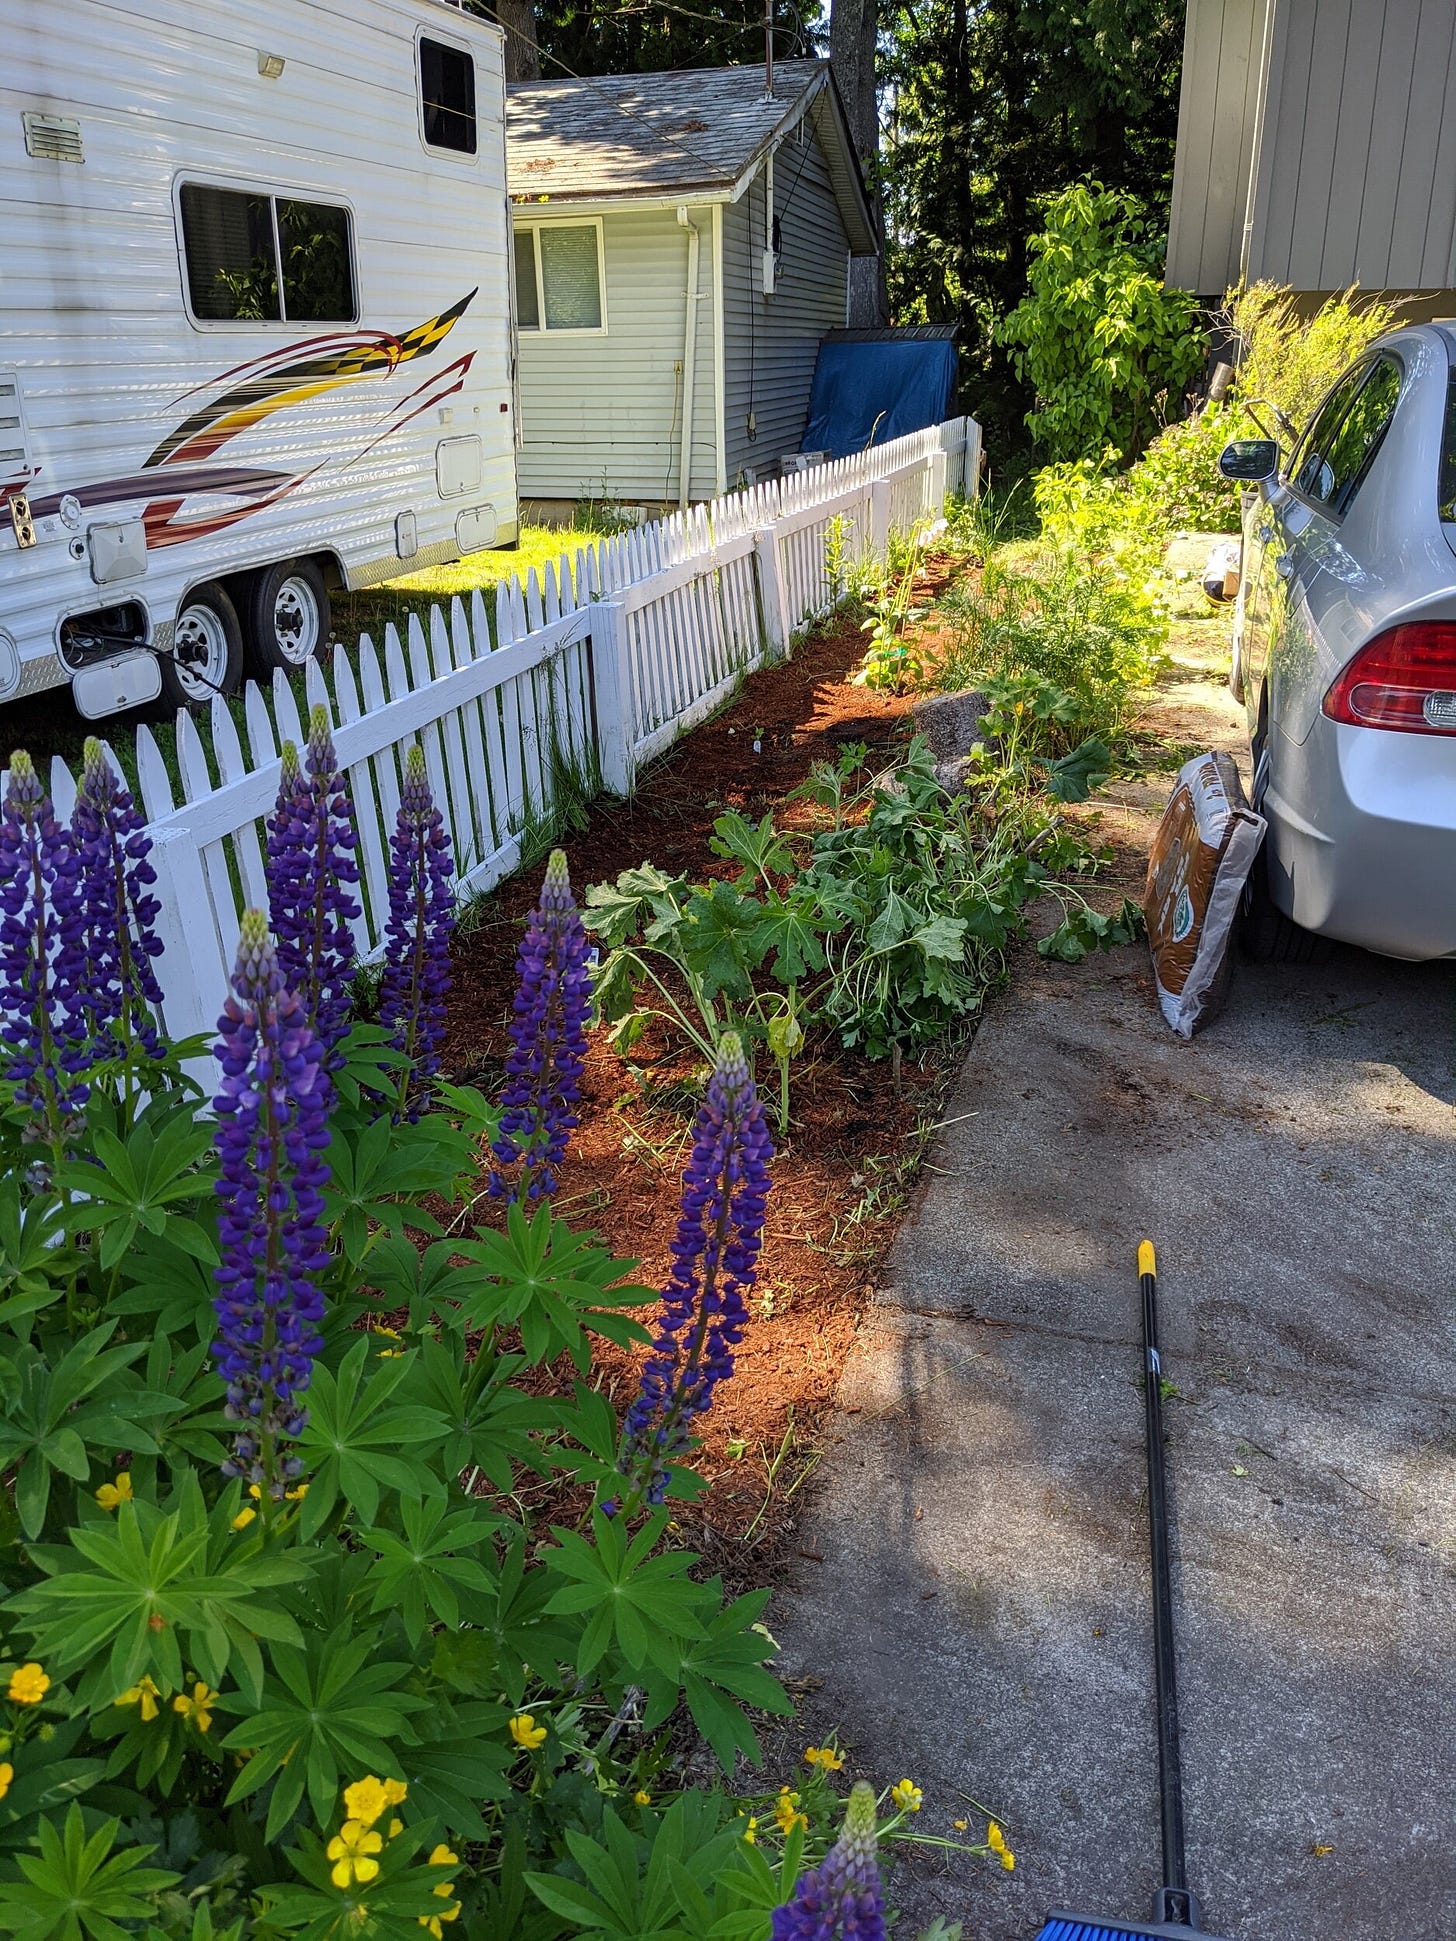 The new bed! Cardboard, mulch and a beautiful Lupine crowded by butter cup flowers.